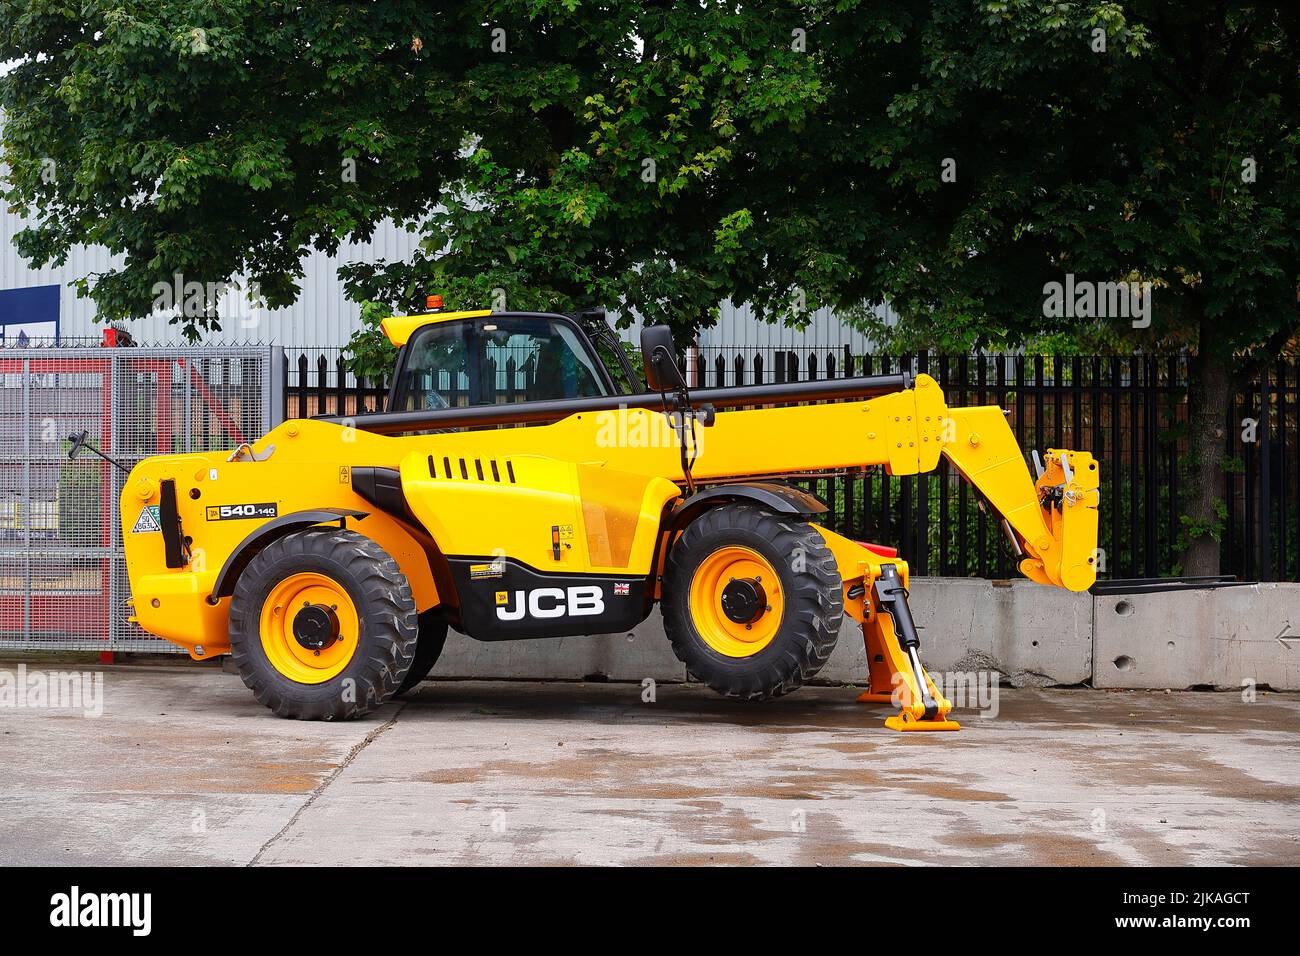 Brand new JCB 540-140 Telescopic Handlers ready for hire at a plant hire depot in Leeds,West Yorkshire,UK Stock Photo